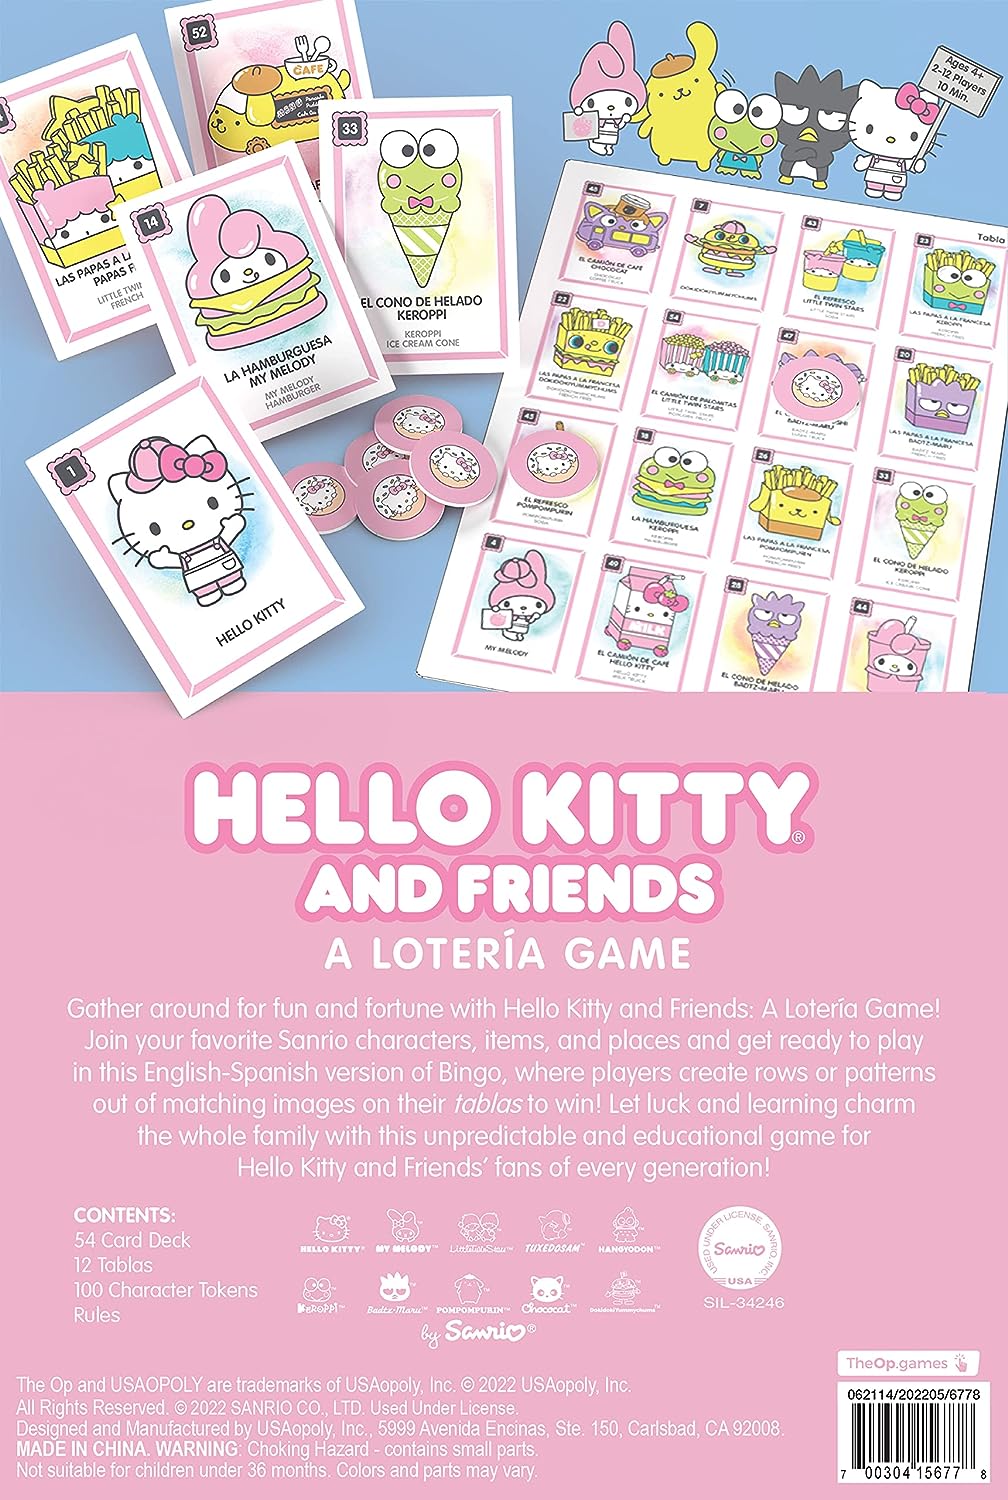 Game - Loteria Hello Kitty-hotRAGS.com